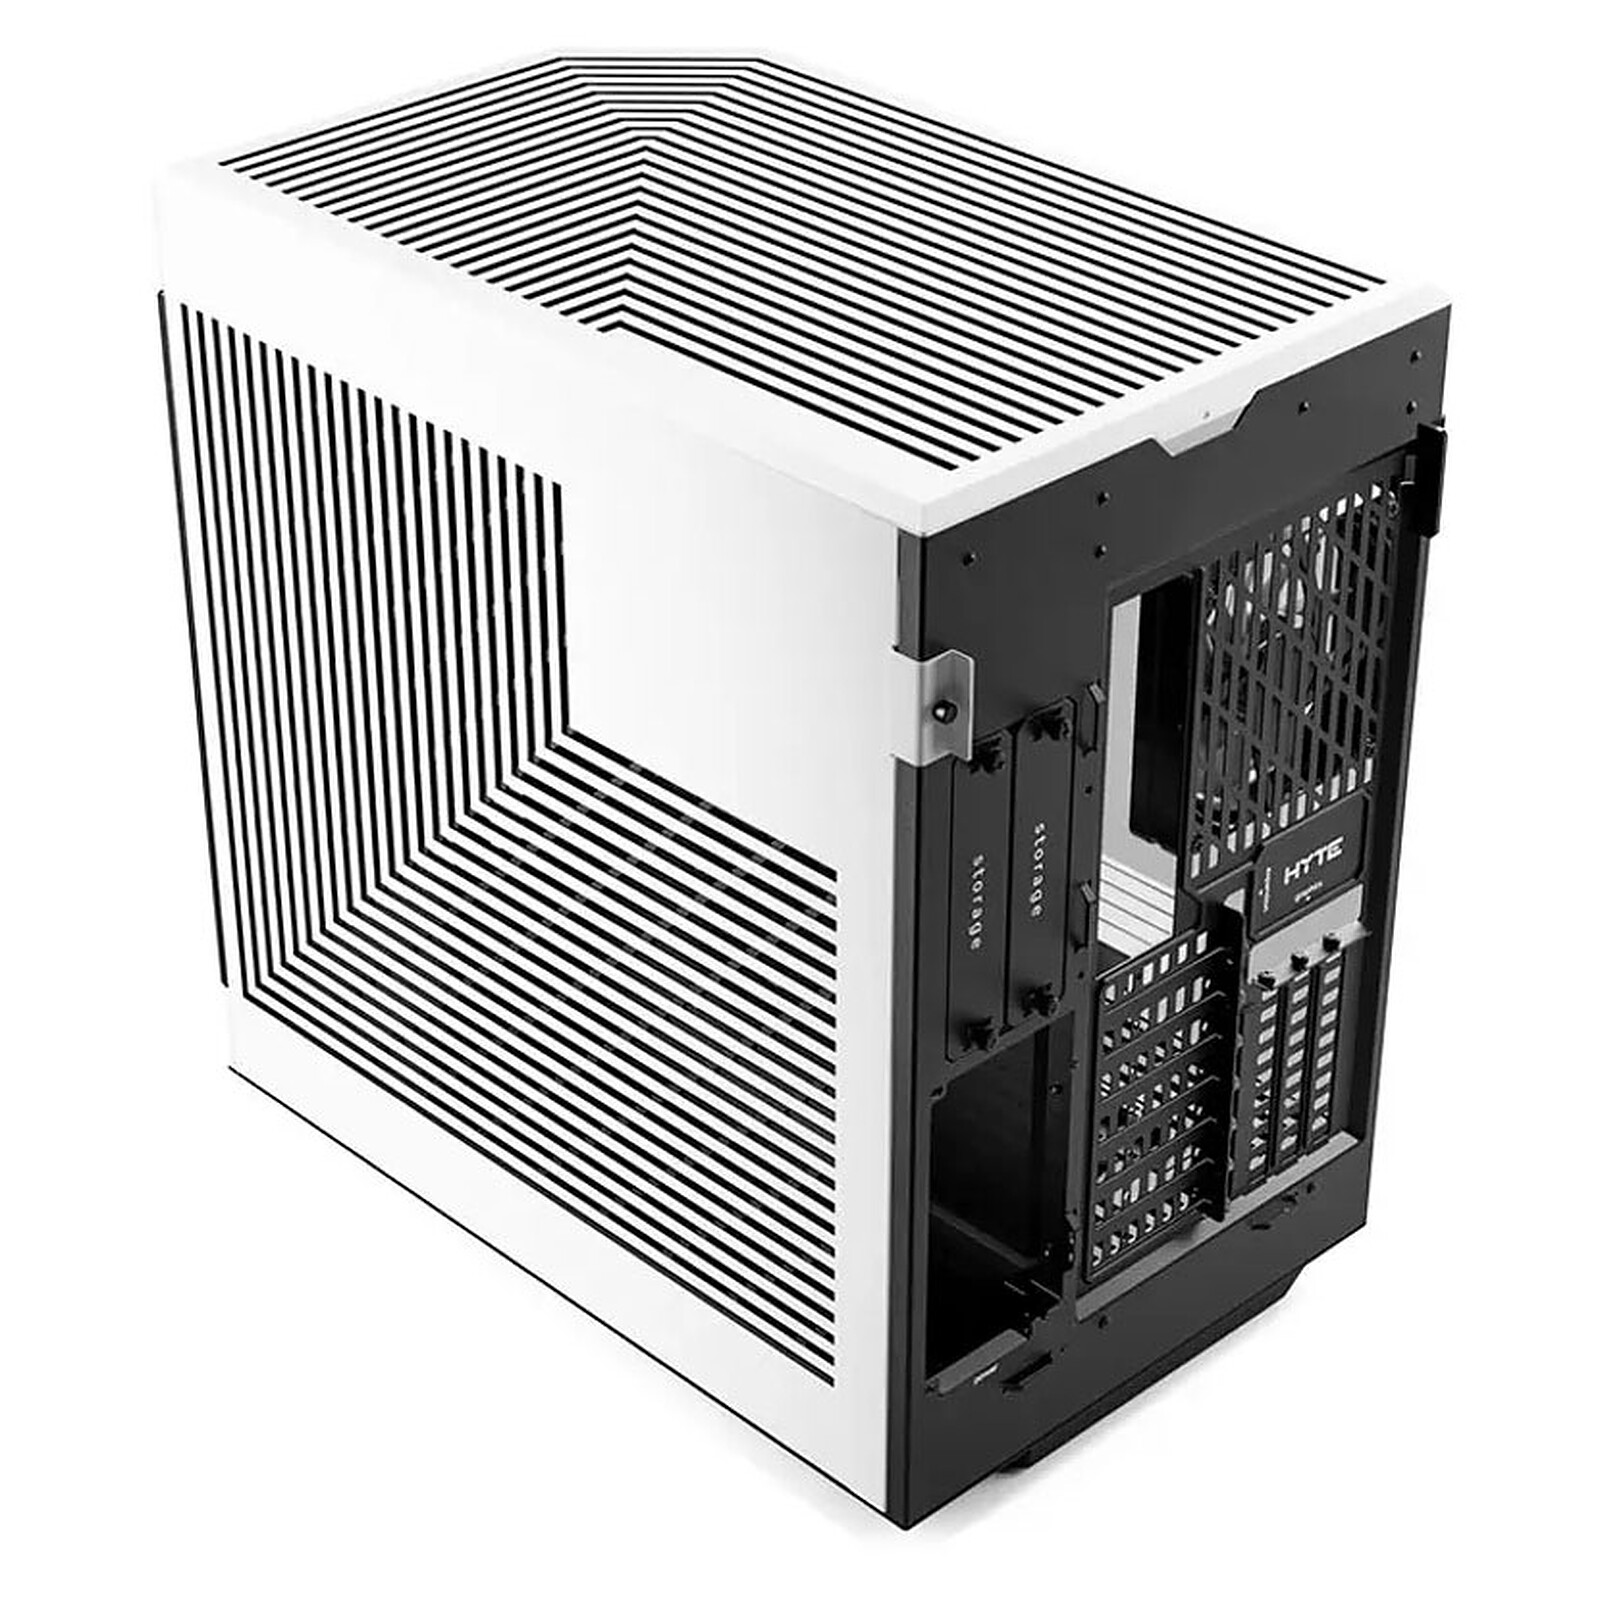 Hyte Y60 (White) - PC cases - LDLC 3-year warranty